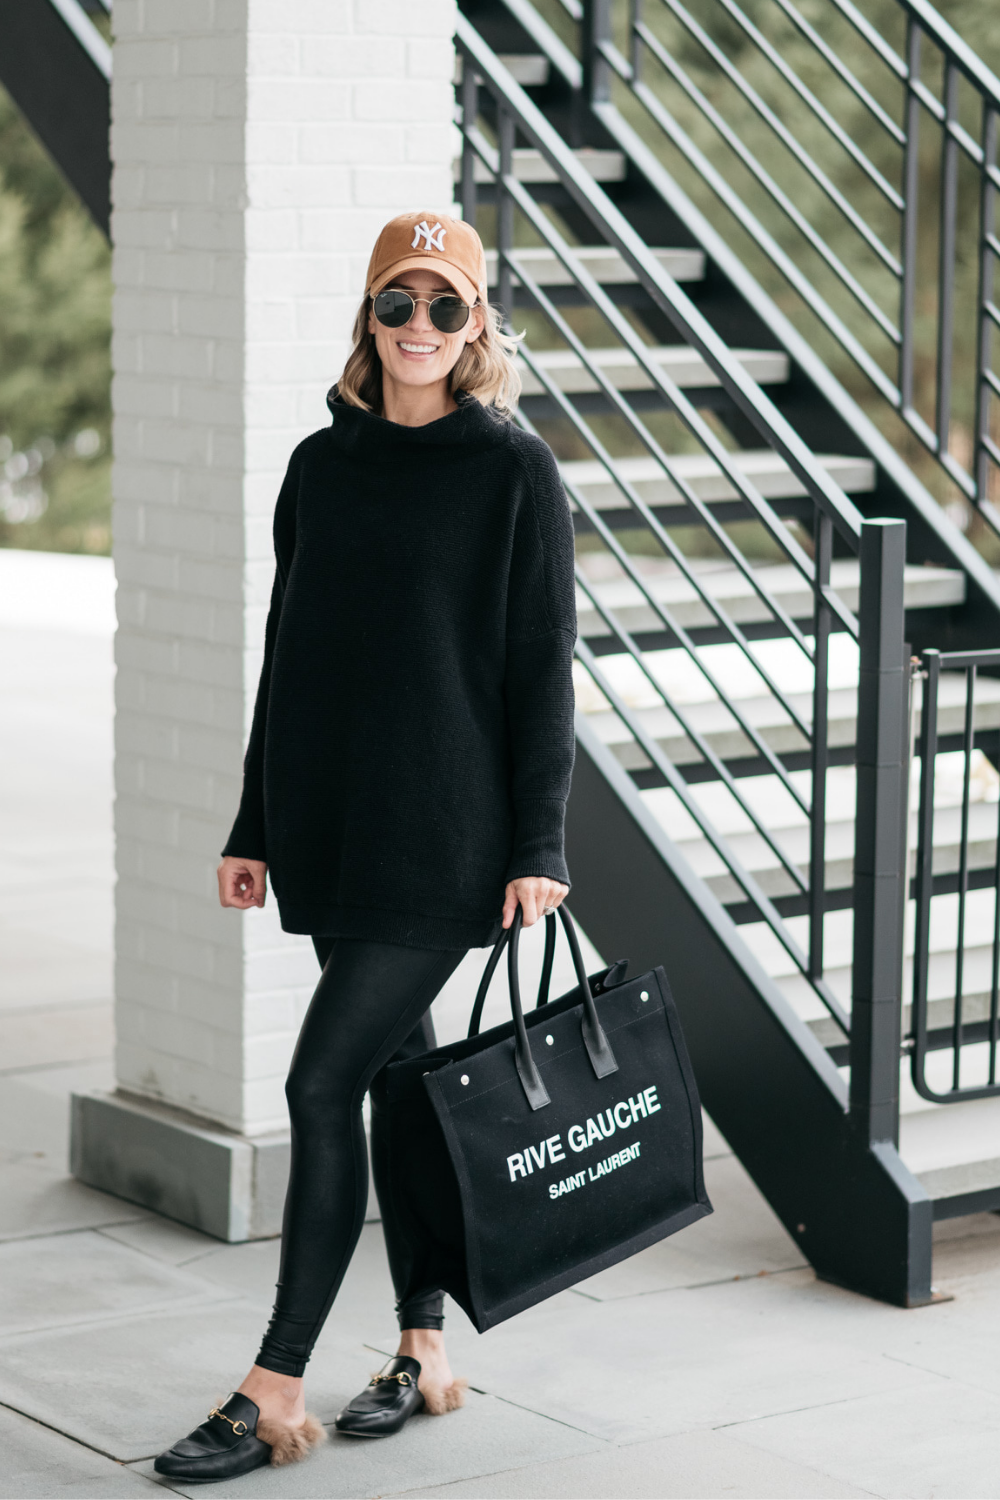 How to Style The Tunic I Wear On Repeat - My Kind of Sweet